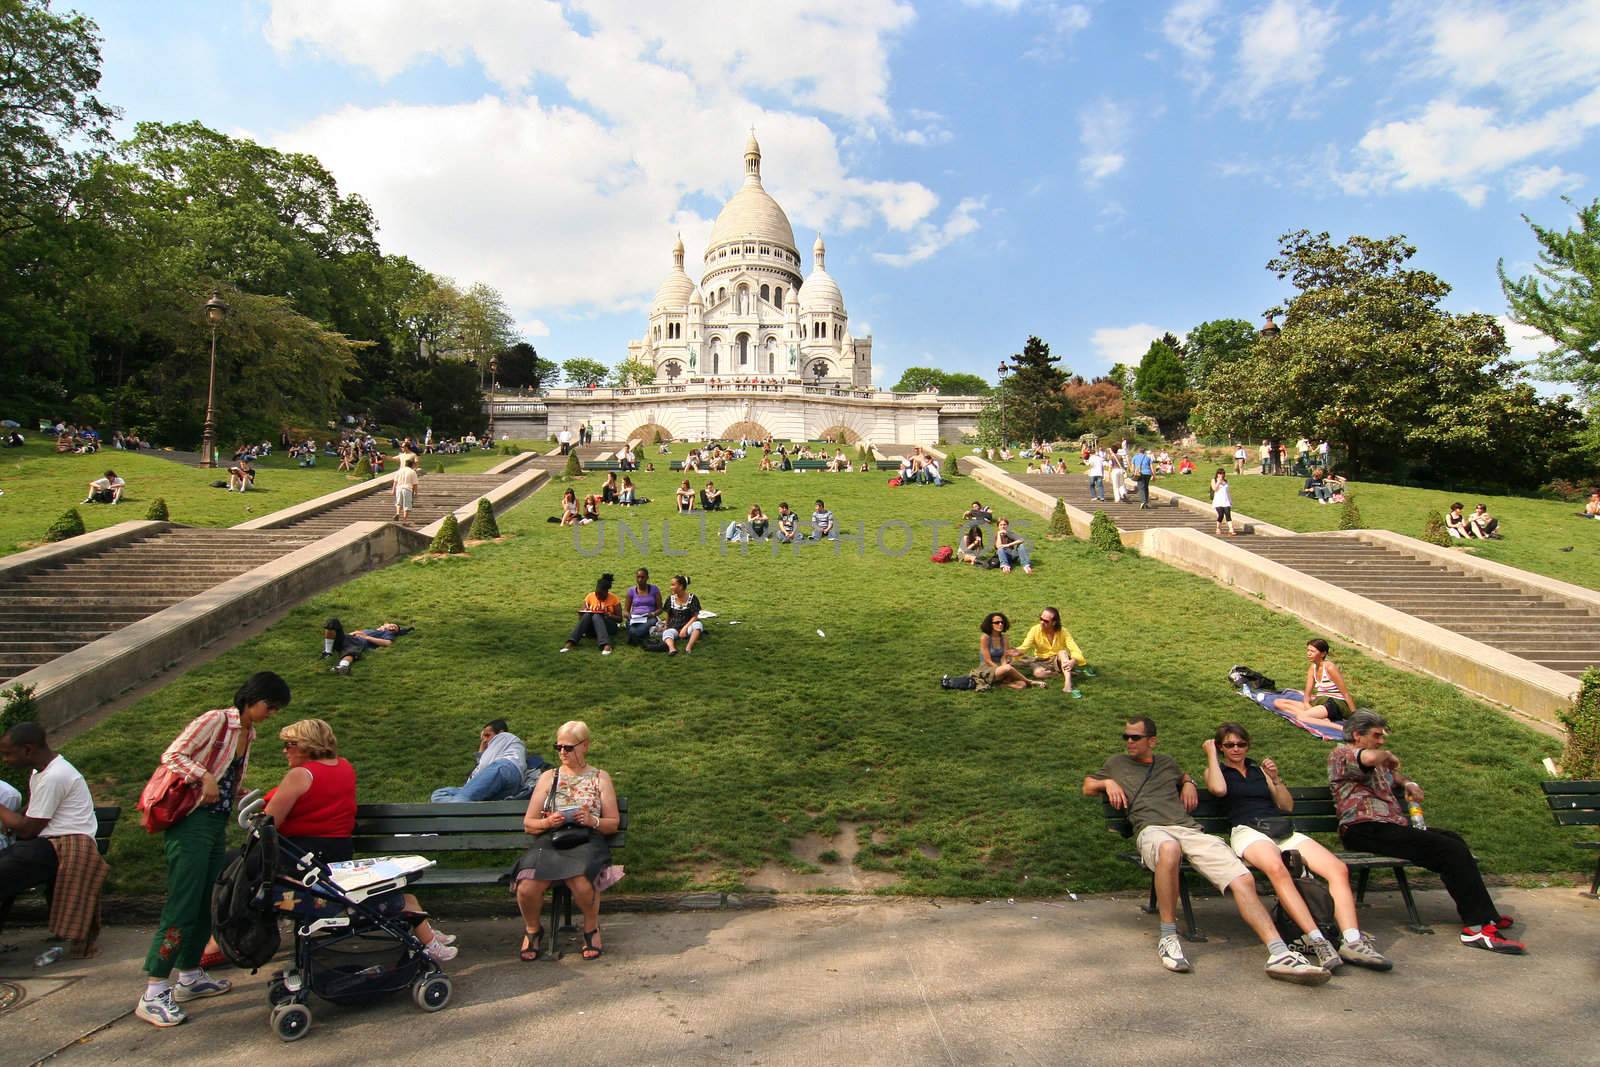 People sitting in the park beneath Sacre Coeur Church in Paris on April 25, 2007.